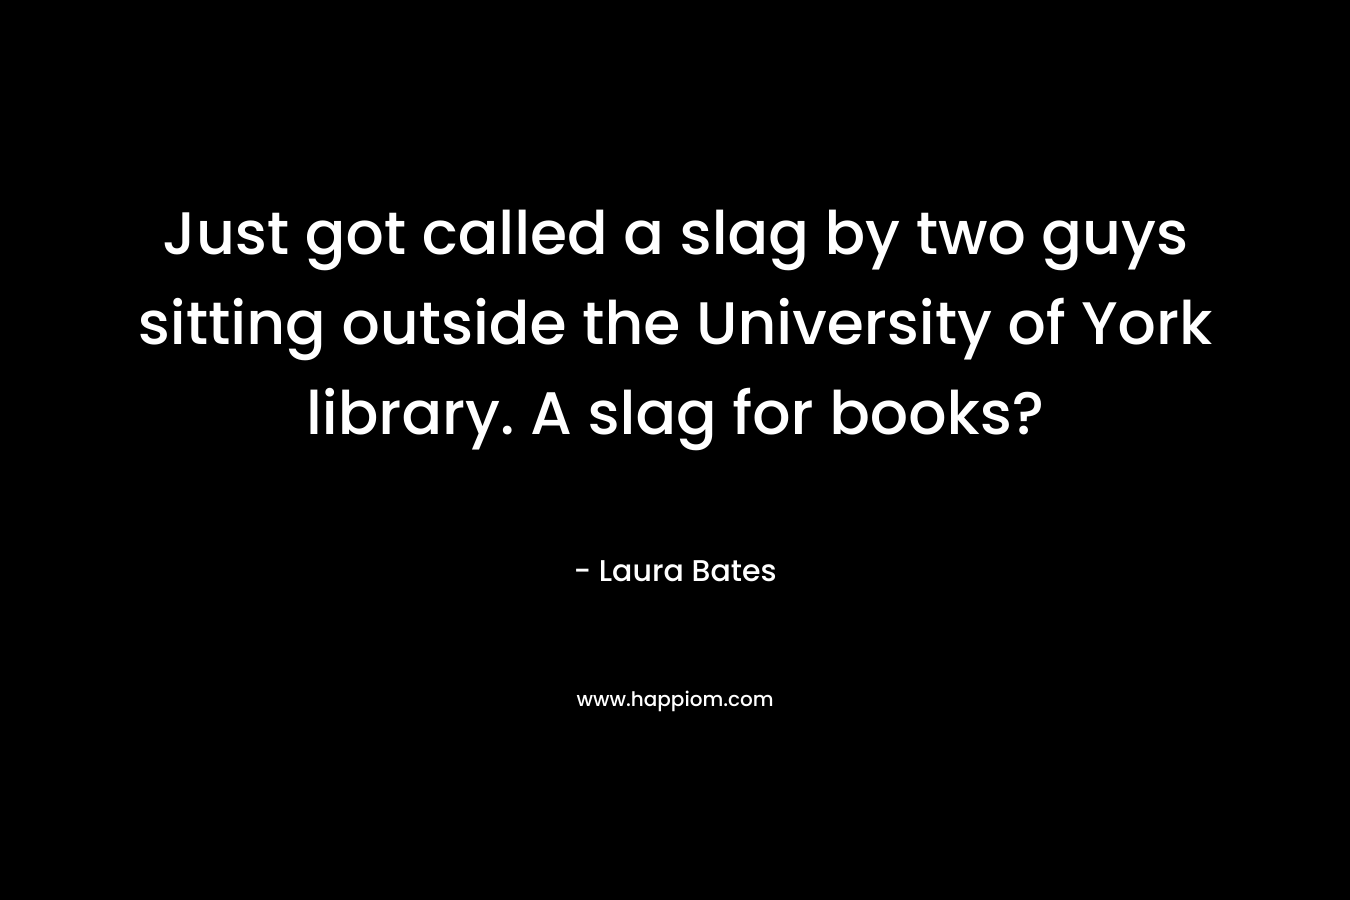 Just got called a slag by two guys sitting outside the University of York library. A slag for books? – Laura Bates